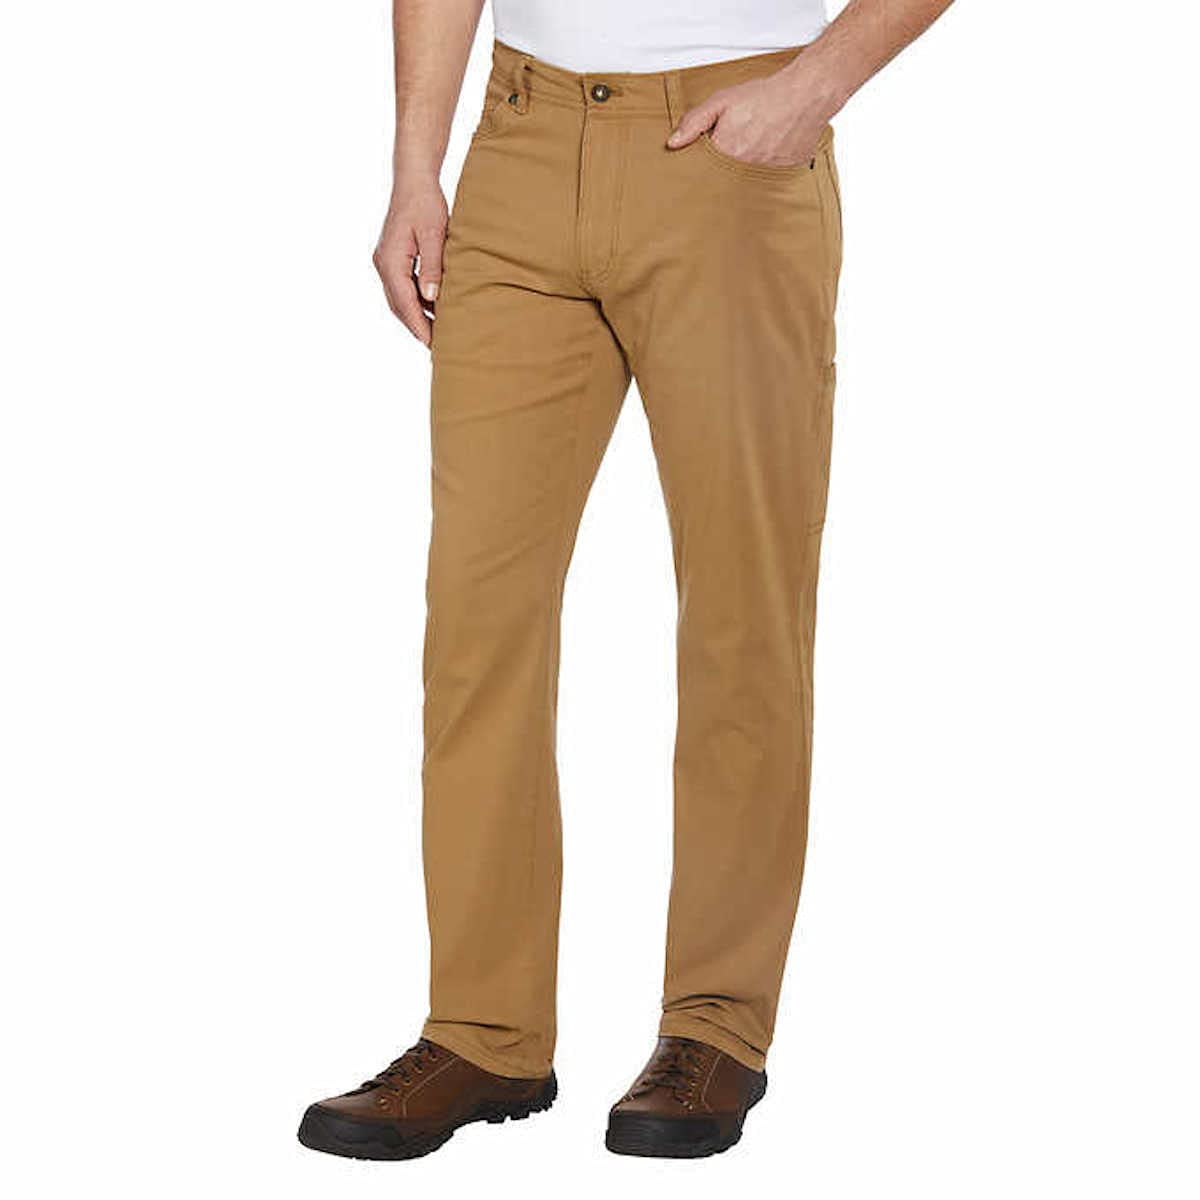 GH BASS & Co Mens Canvas Terrain Stretch Pants Outdoor Pick Size and Color NWT 